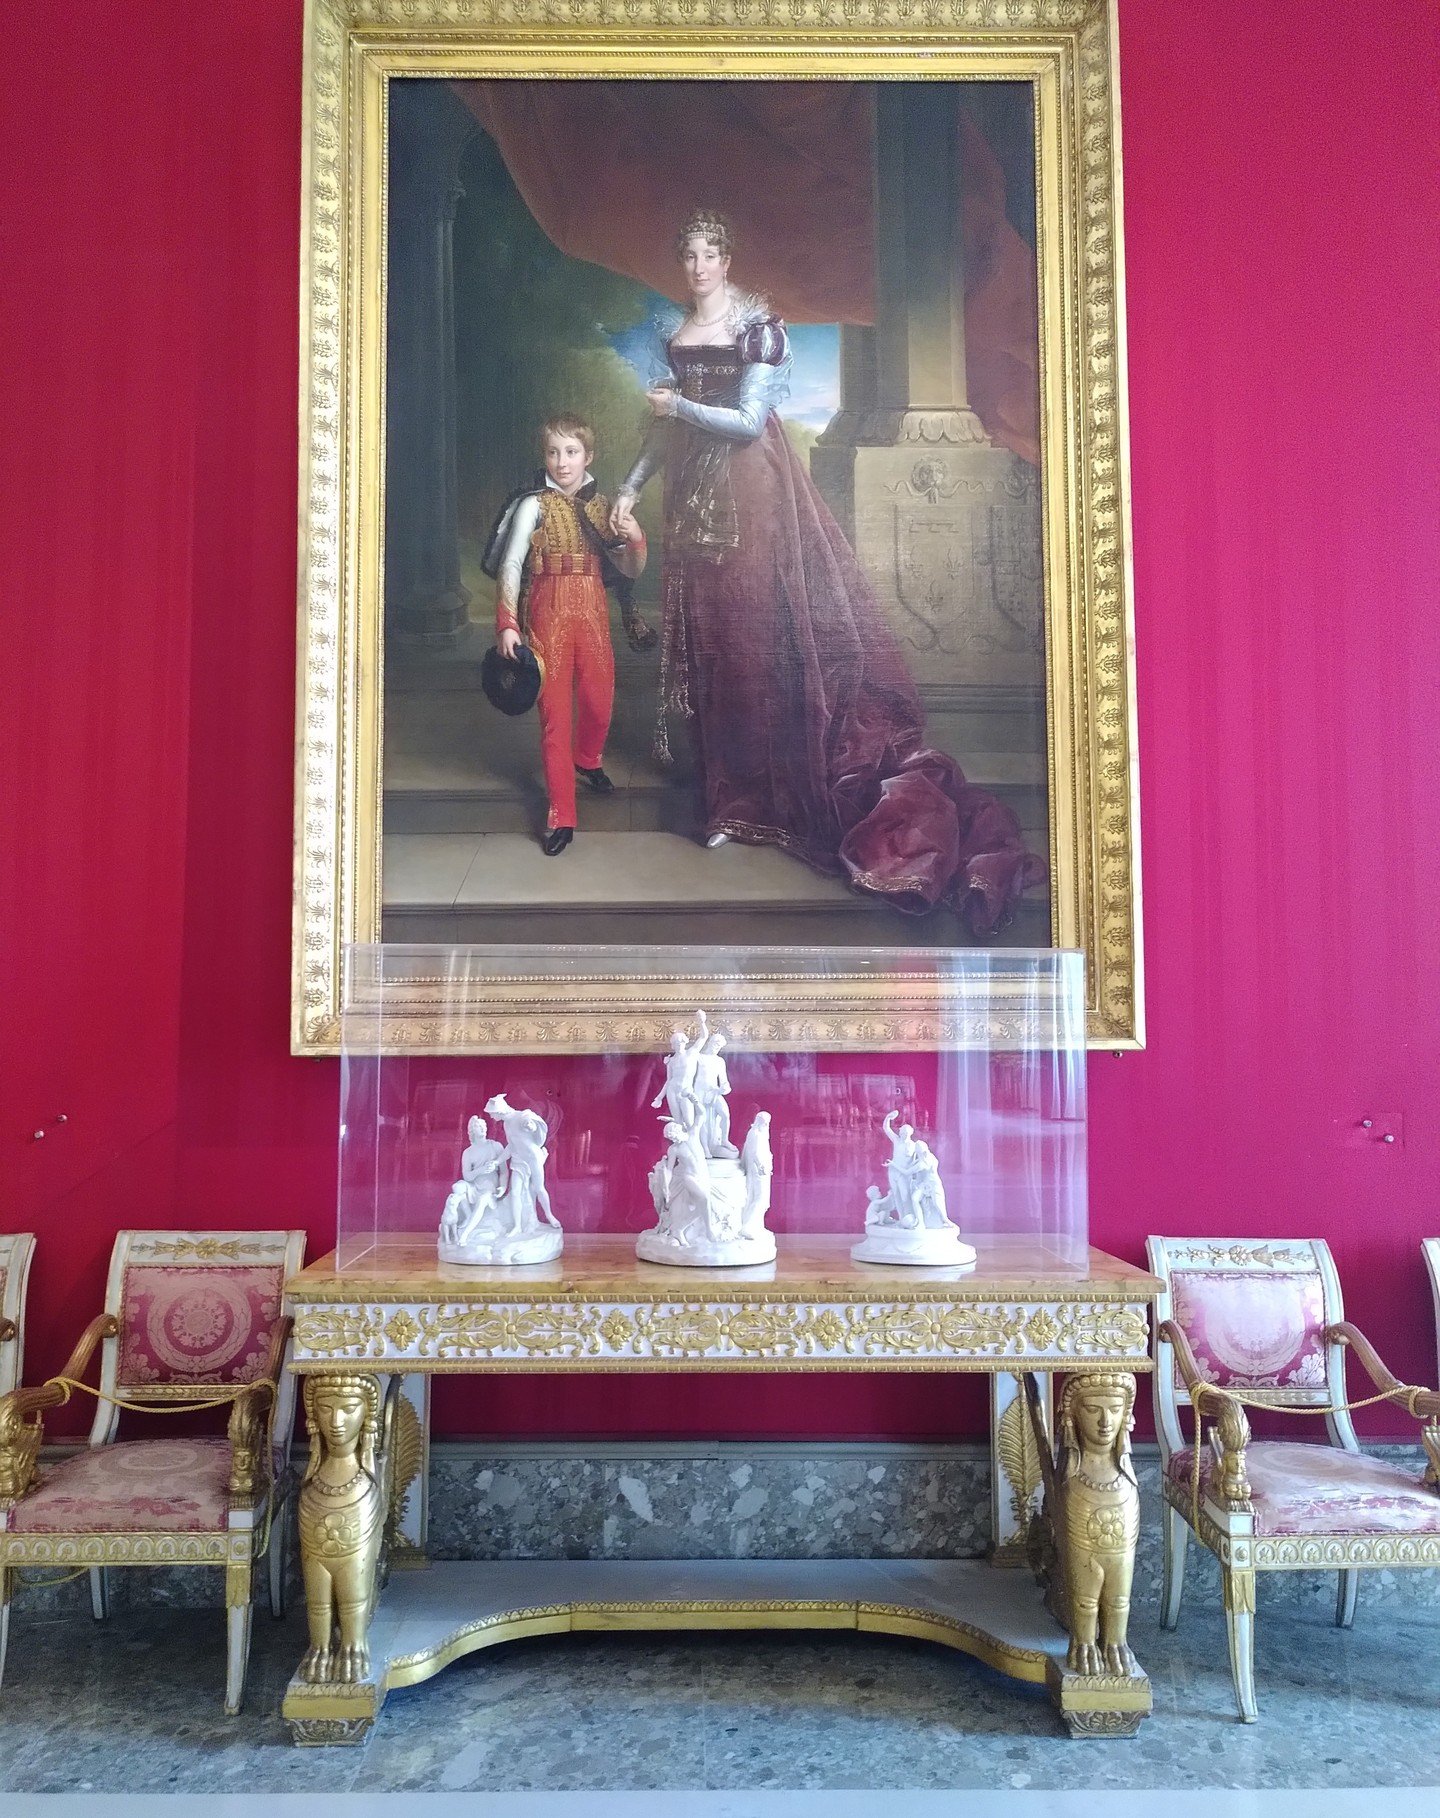 #mothersday 
Happy Mother's Day!

Hanging in the first floor galleries is this large portrait of a mother and son. Fran&ccedil;ois G&eacute;rard painted Maria Amalia, Duchess of Orl&eacute;ans, holding the hand of her eldest son Ferdinand Philippe, t